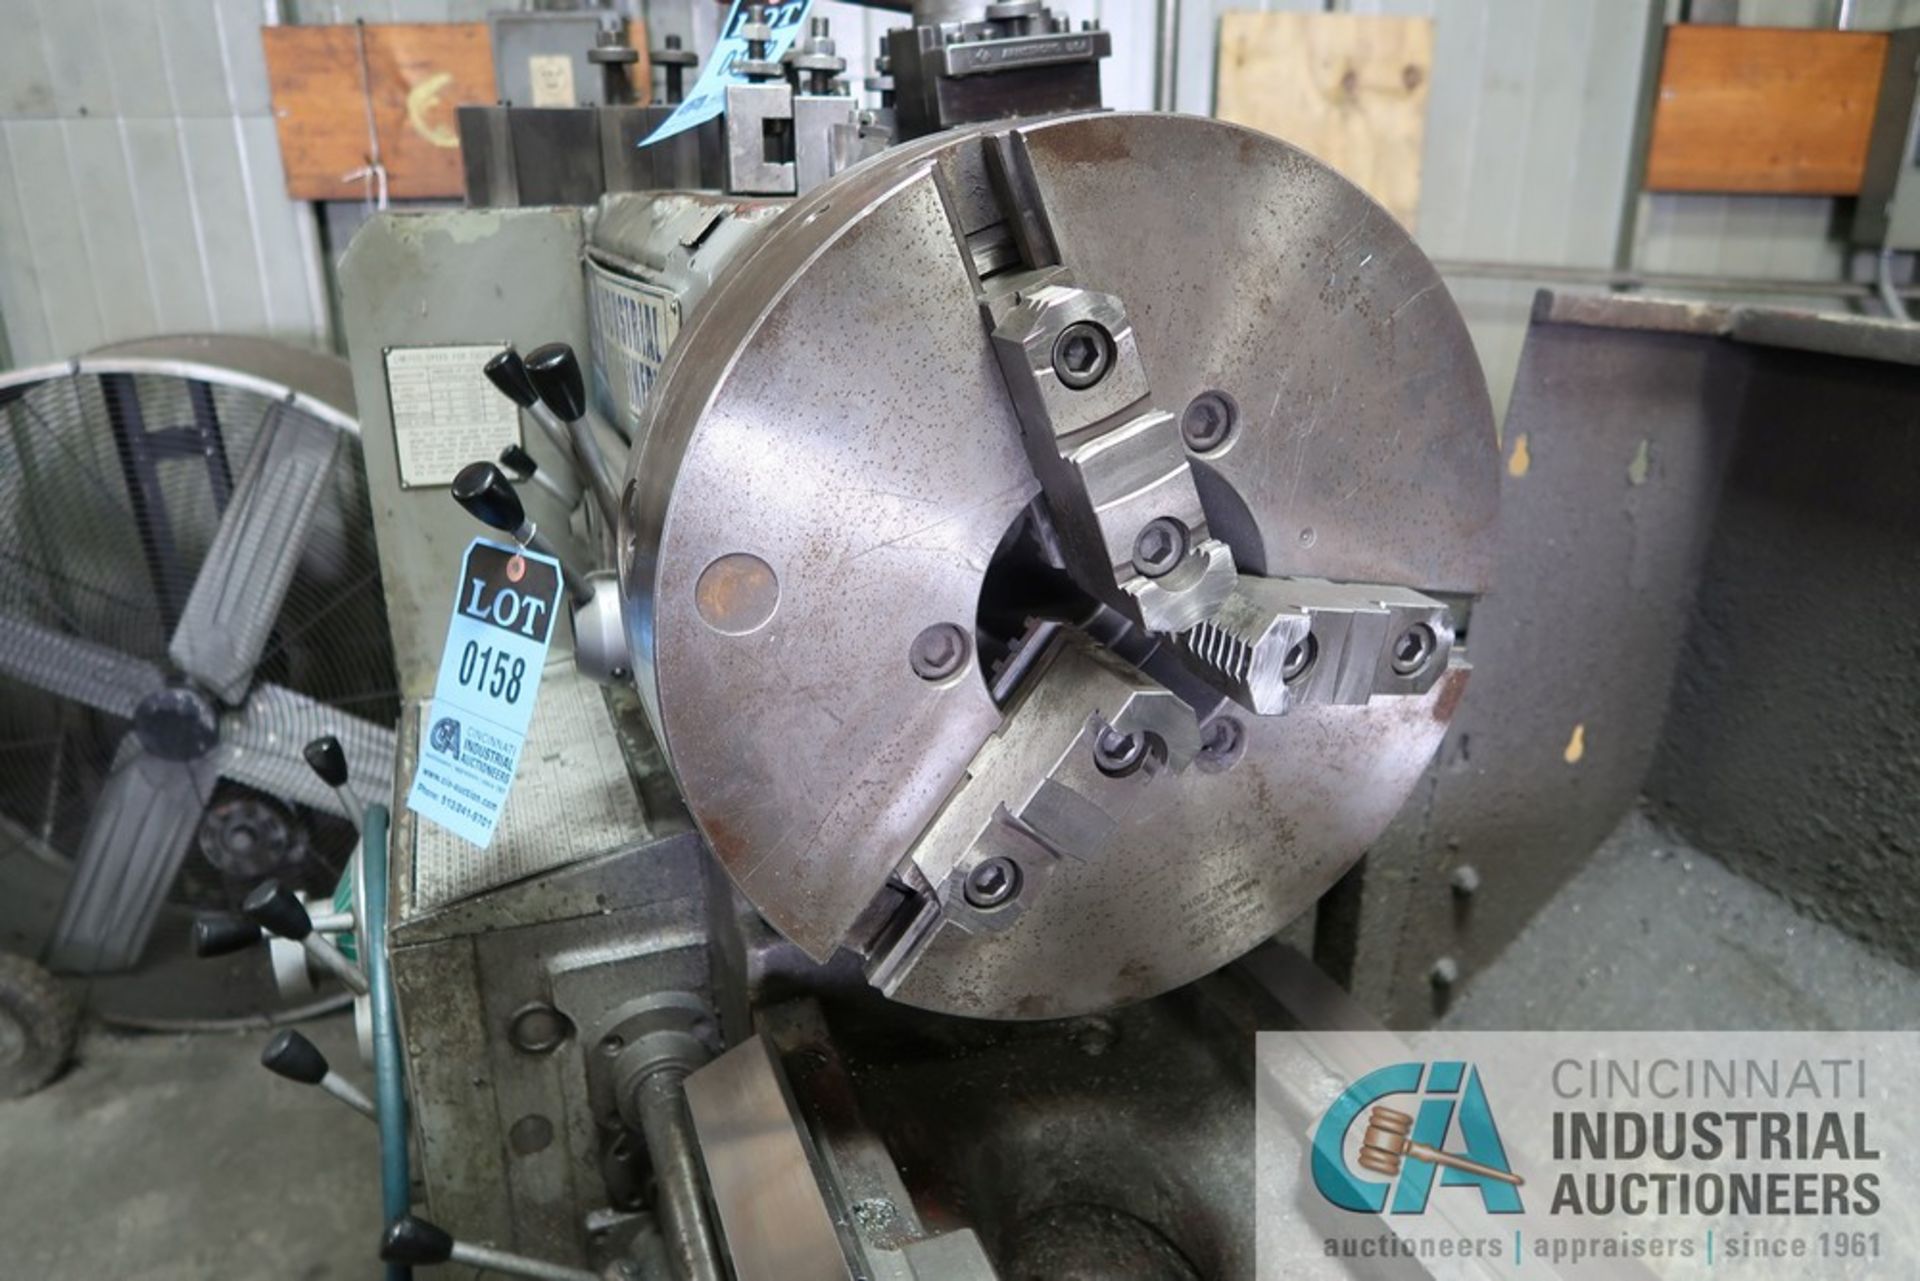 21" X 100" US MACHINERY ENGINE LATHE; S/N 1019009, 3" SPINDLE HOLE, SPINDLE SPEEDS 25-1,500 RPM, 18" - Image 6 of 12